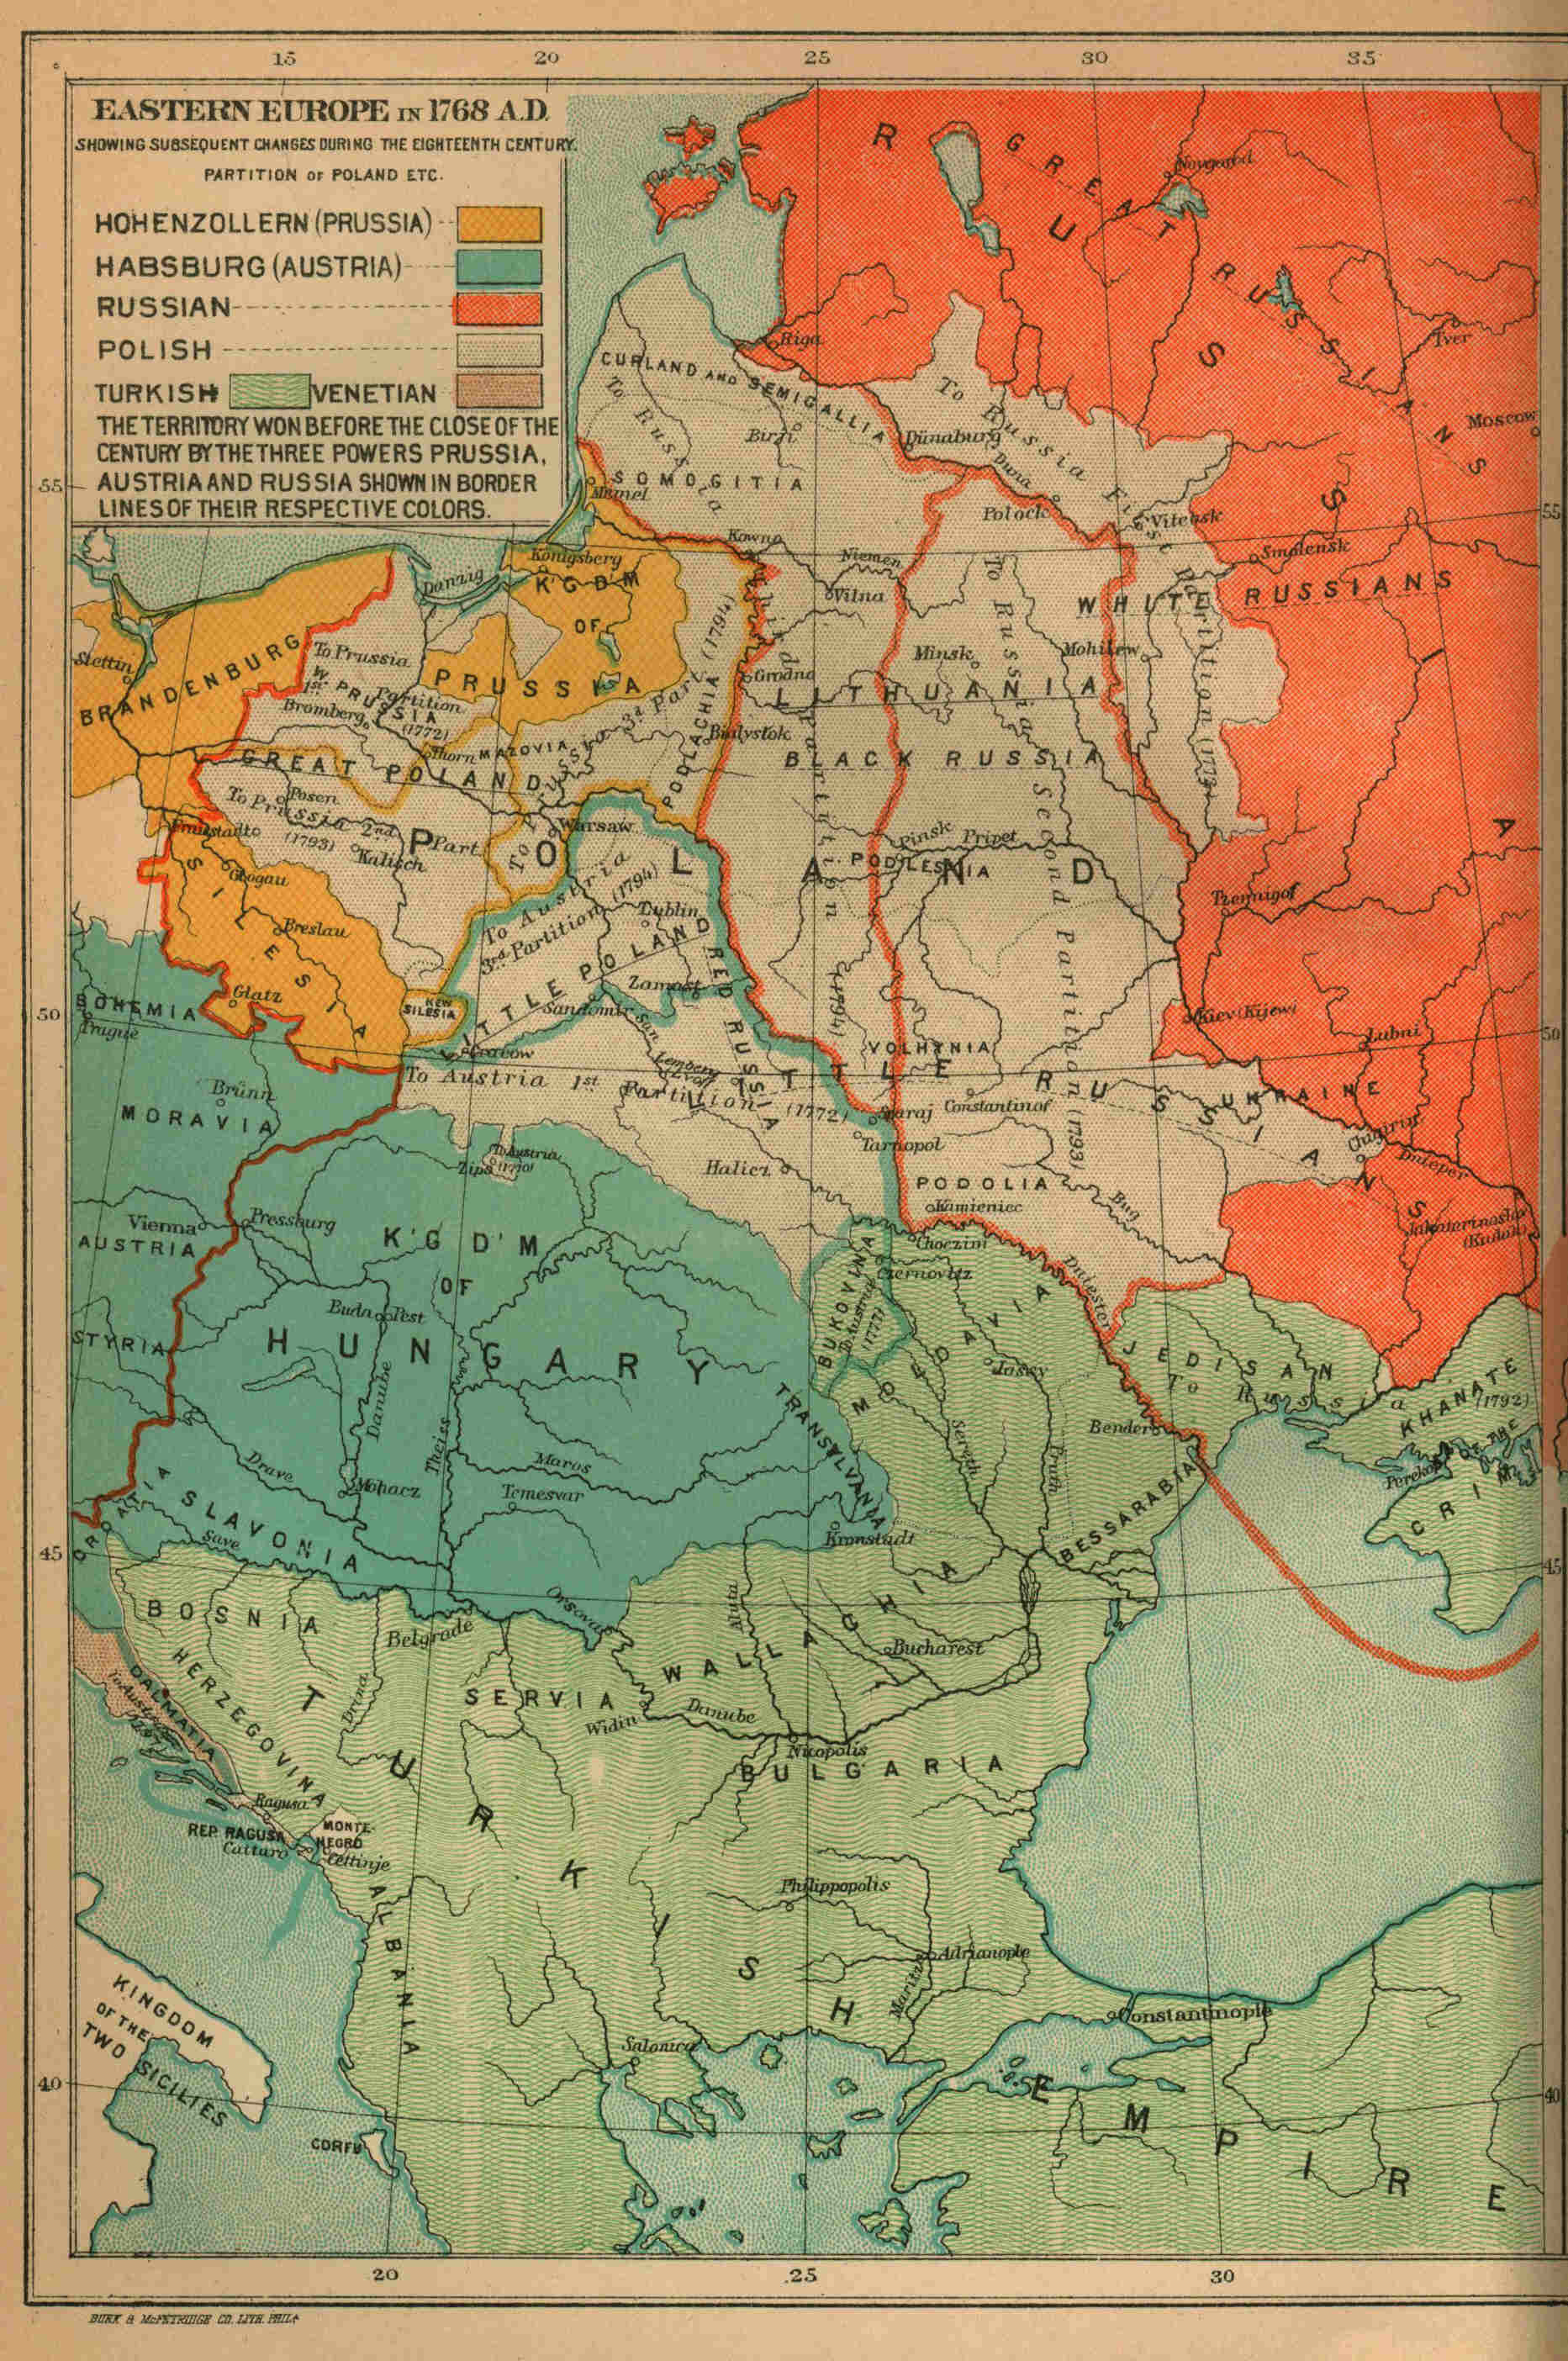 EASTERN EUROPE IN 1768 A. D.